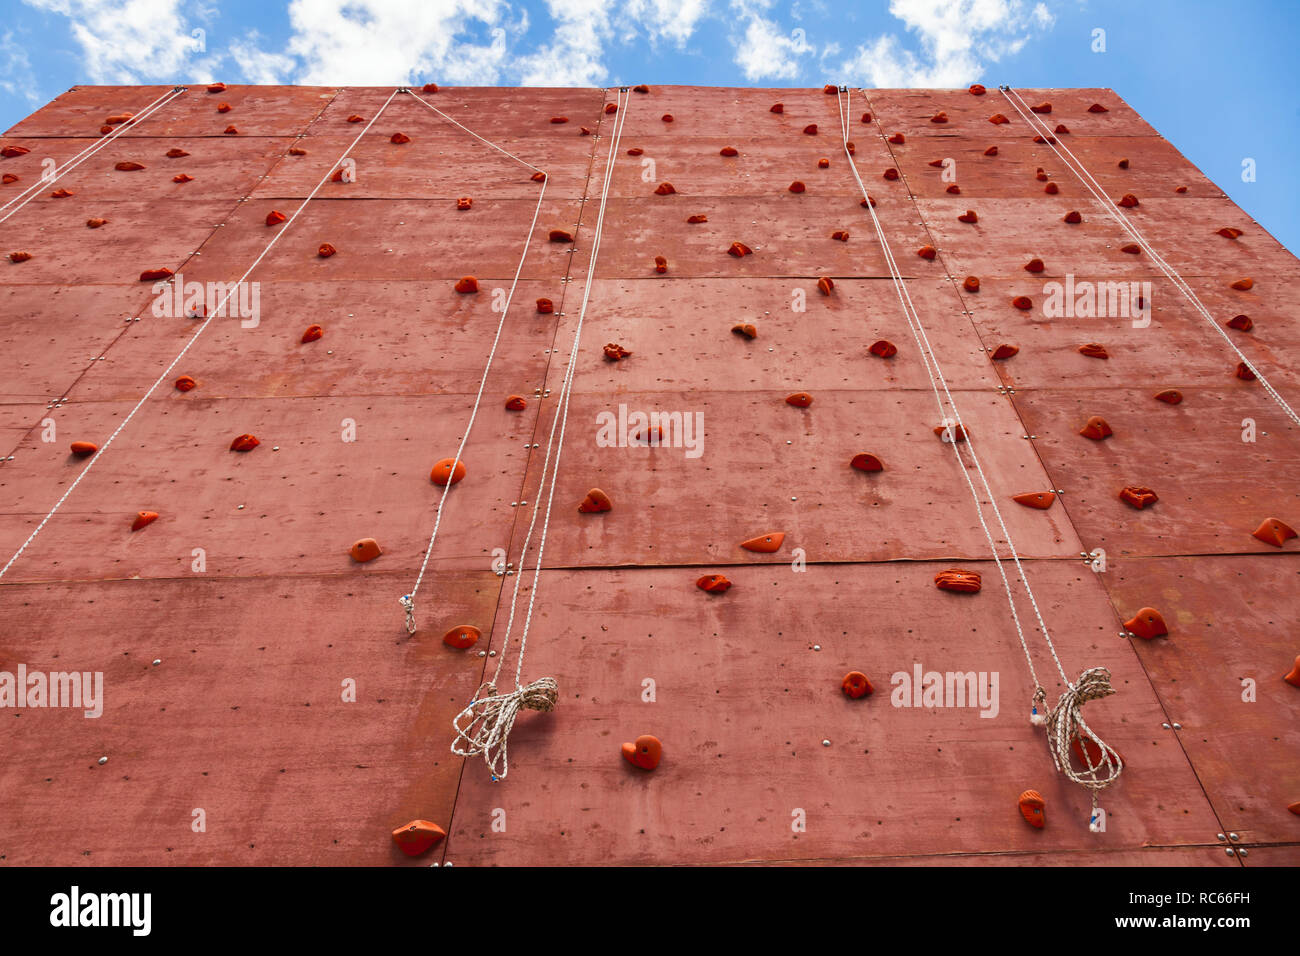 Artificial rock climbing wall with grips for hands and feet in outdoor adventure park used to practise lead climbing or bouldering Stock Photo